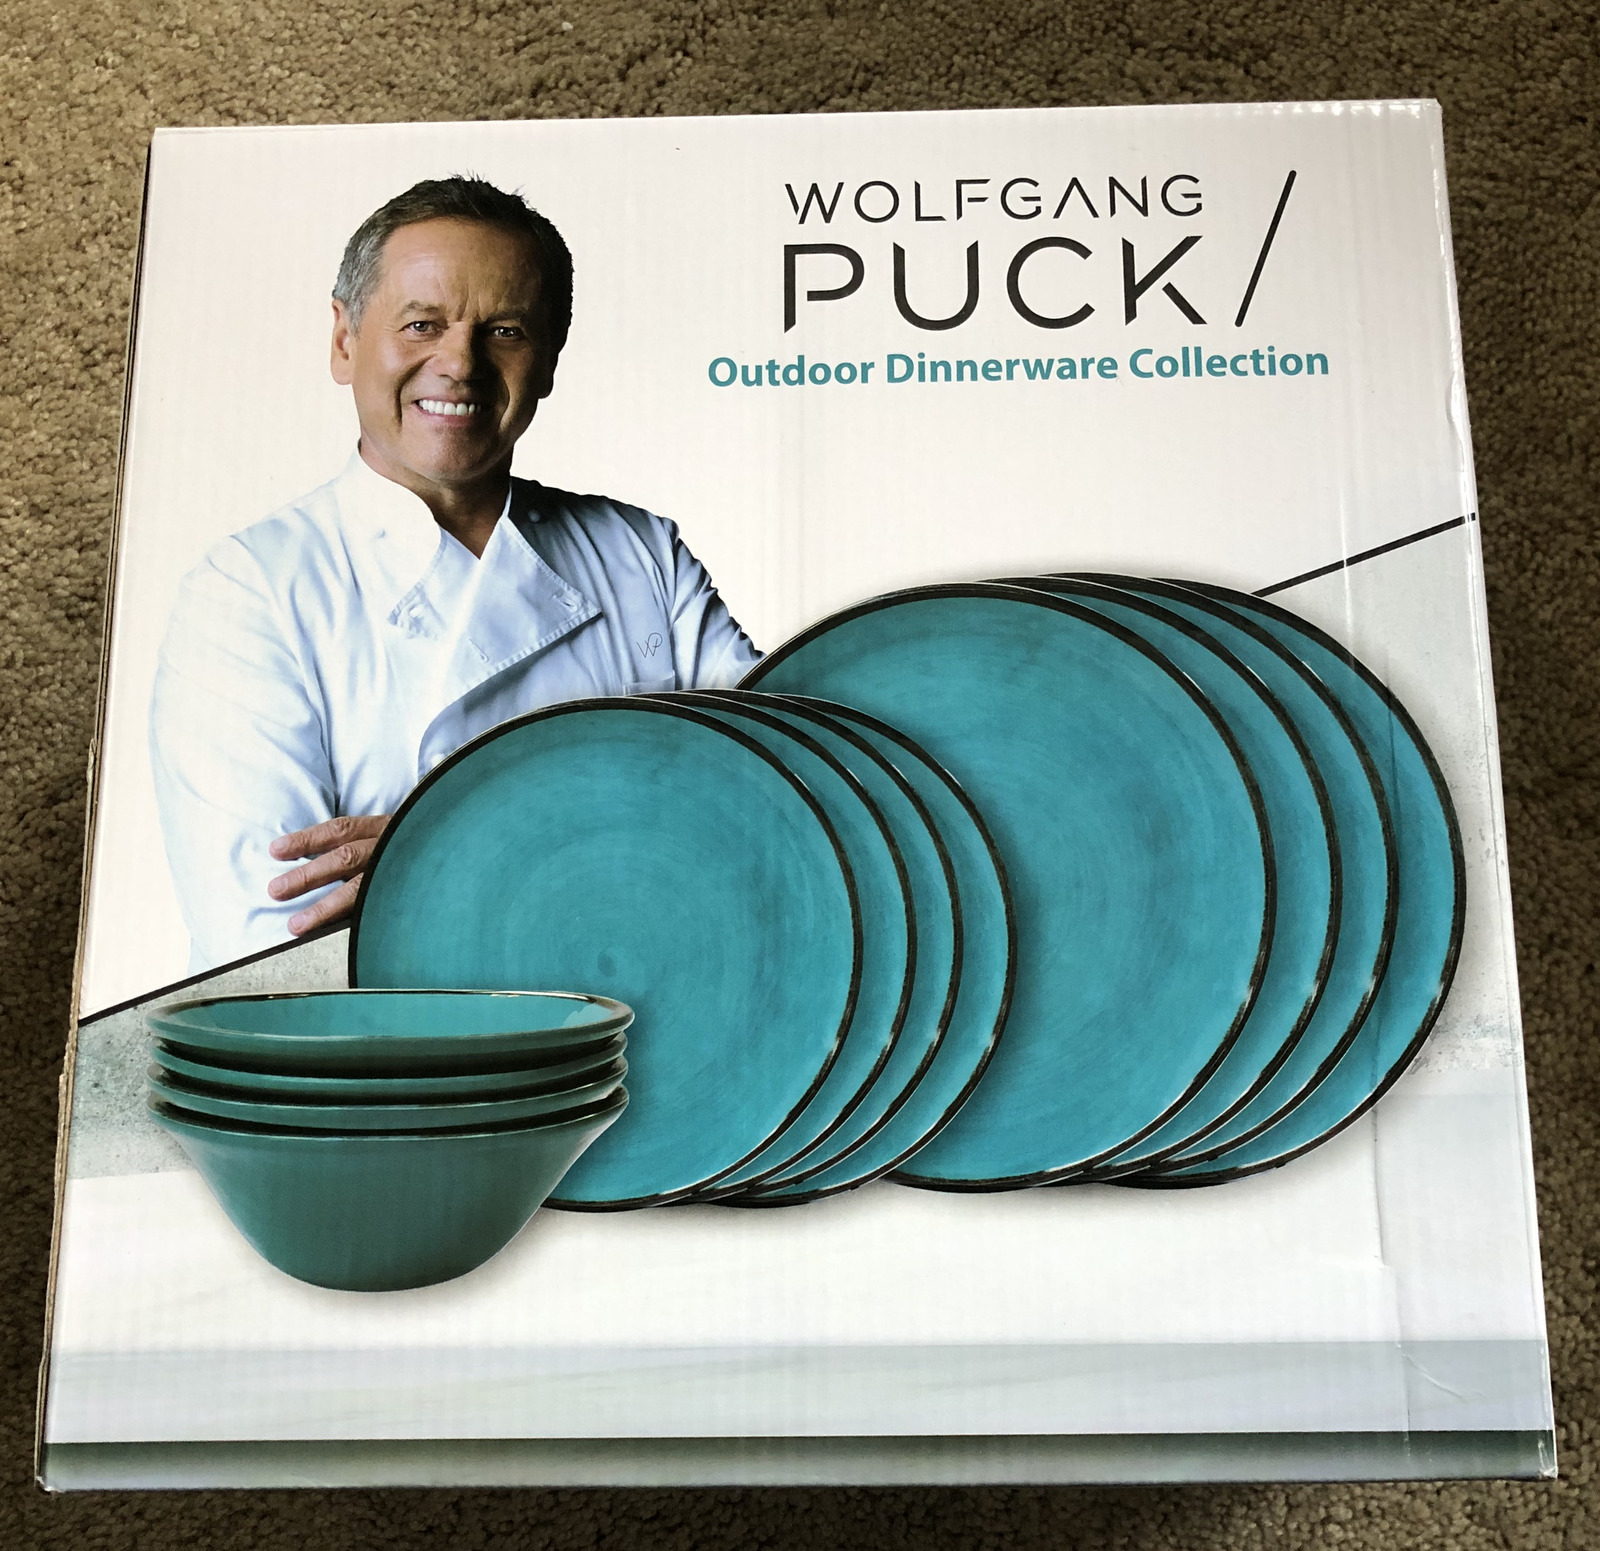 Wolfgang Puck Outdoor Dinnerware Collection, new - $35.00